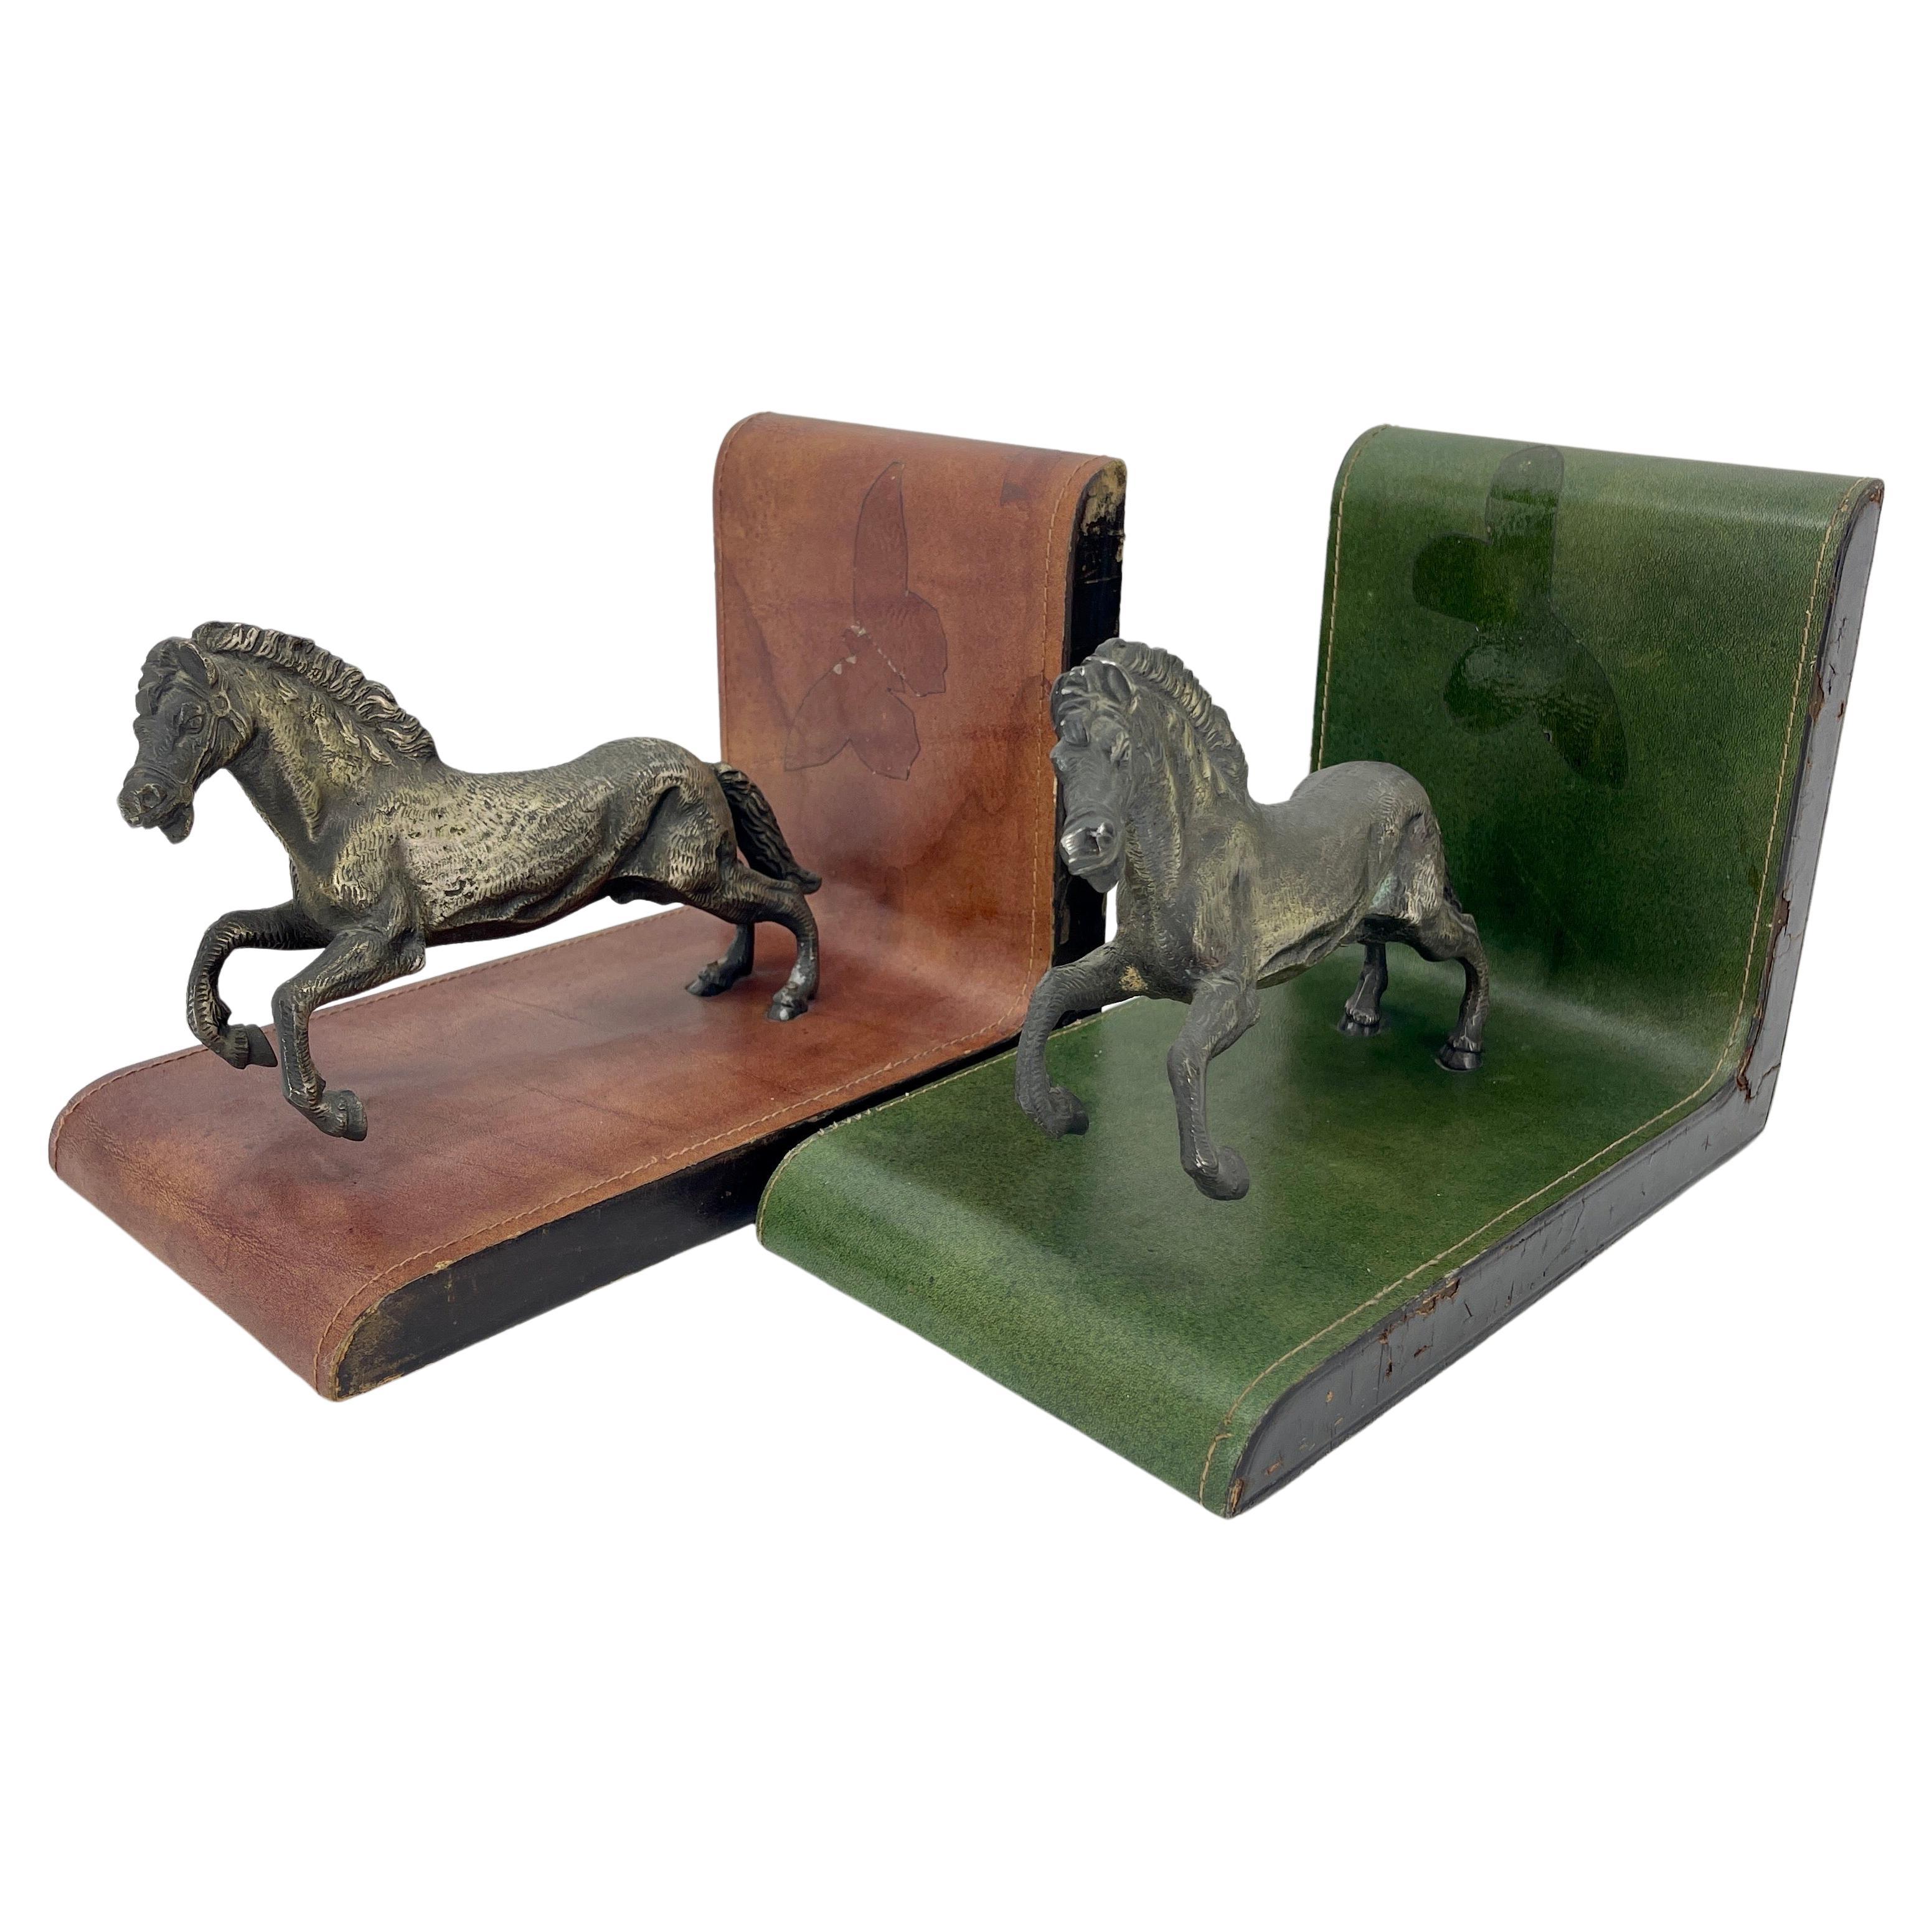 Extra Large Set of Vintage Leather Bookends with Patinated Bronze Horses in Full Sprint, Italy circa 1950s.
One bookend is in red leather and the other in green leather. The patina of the leather and bronze shows the unique patina of time given by